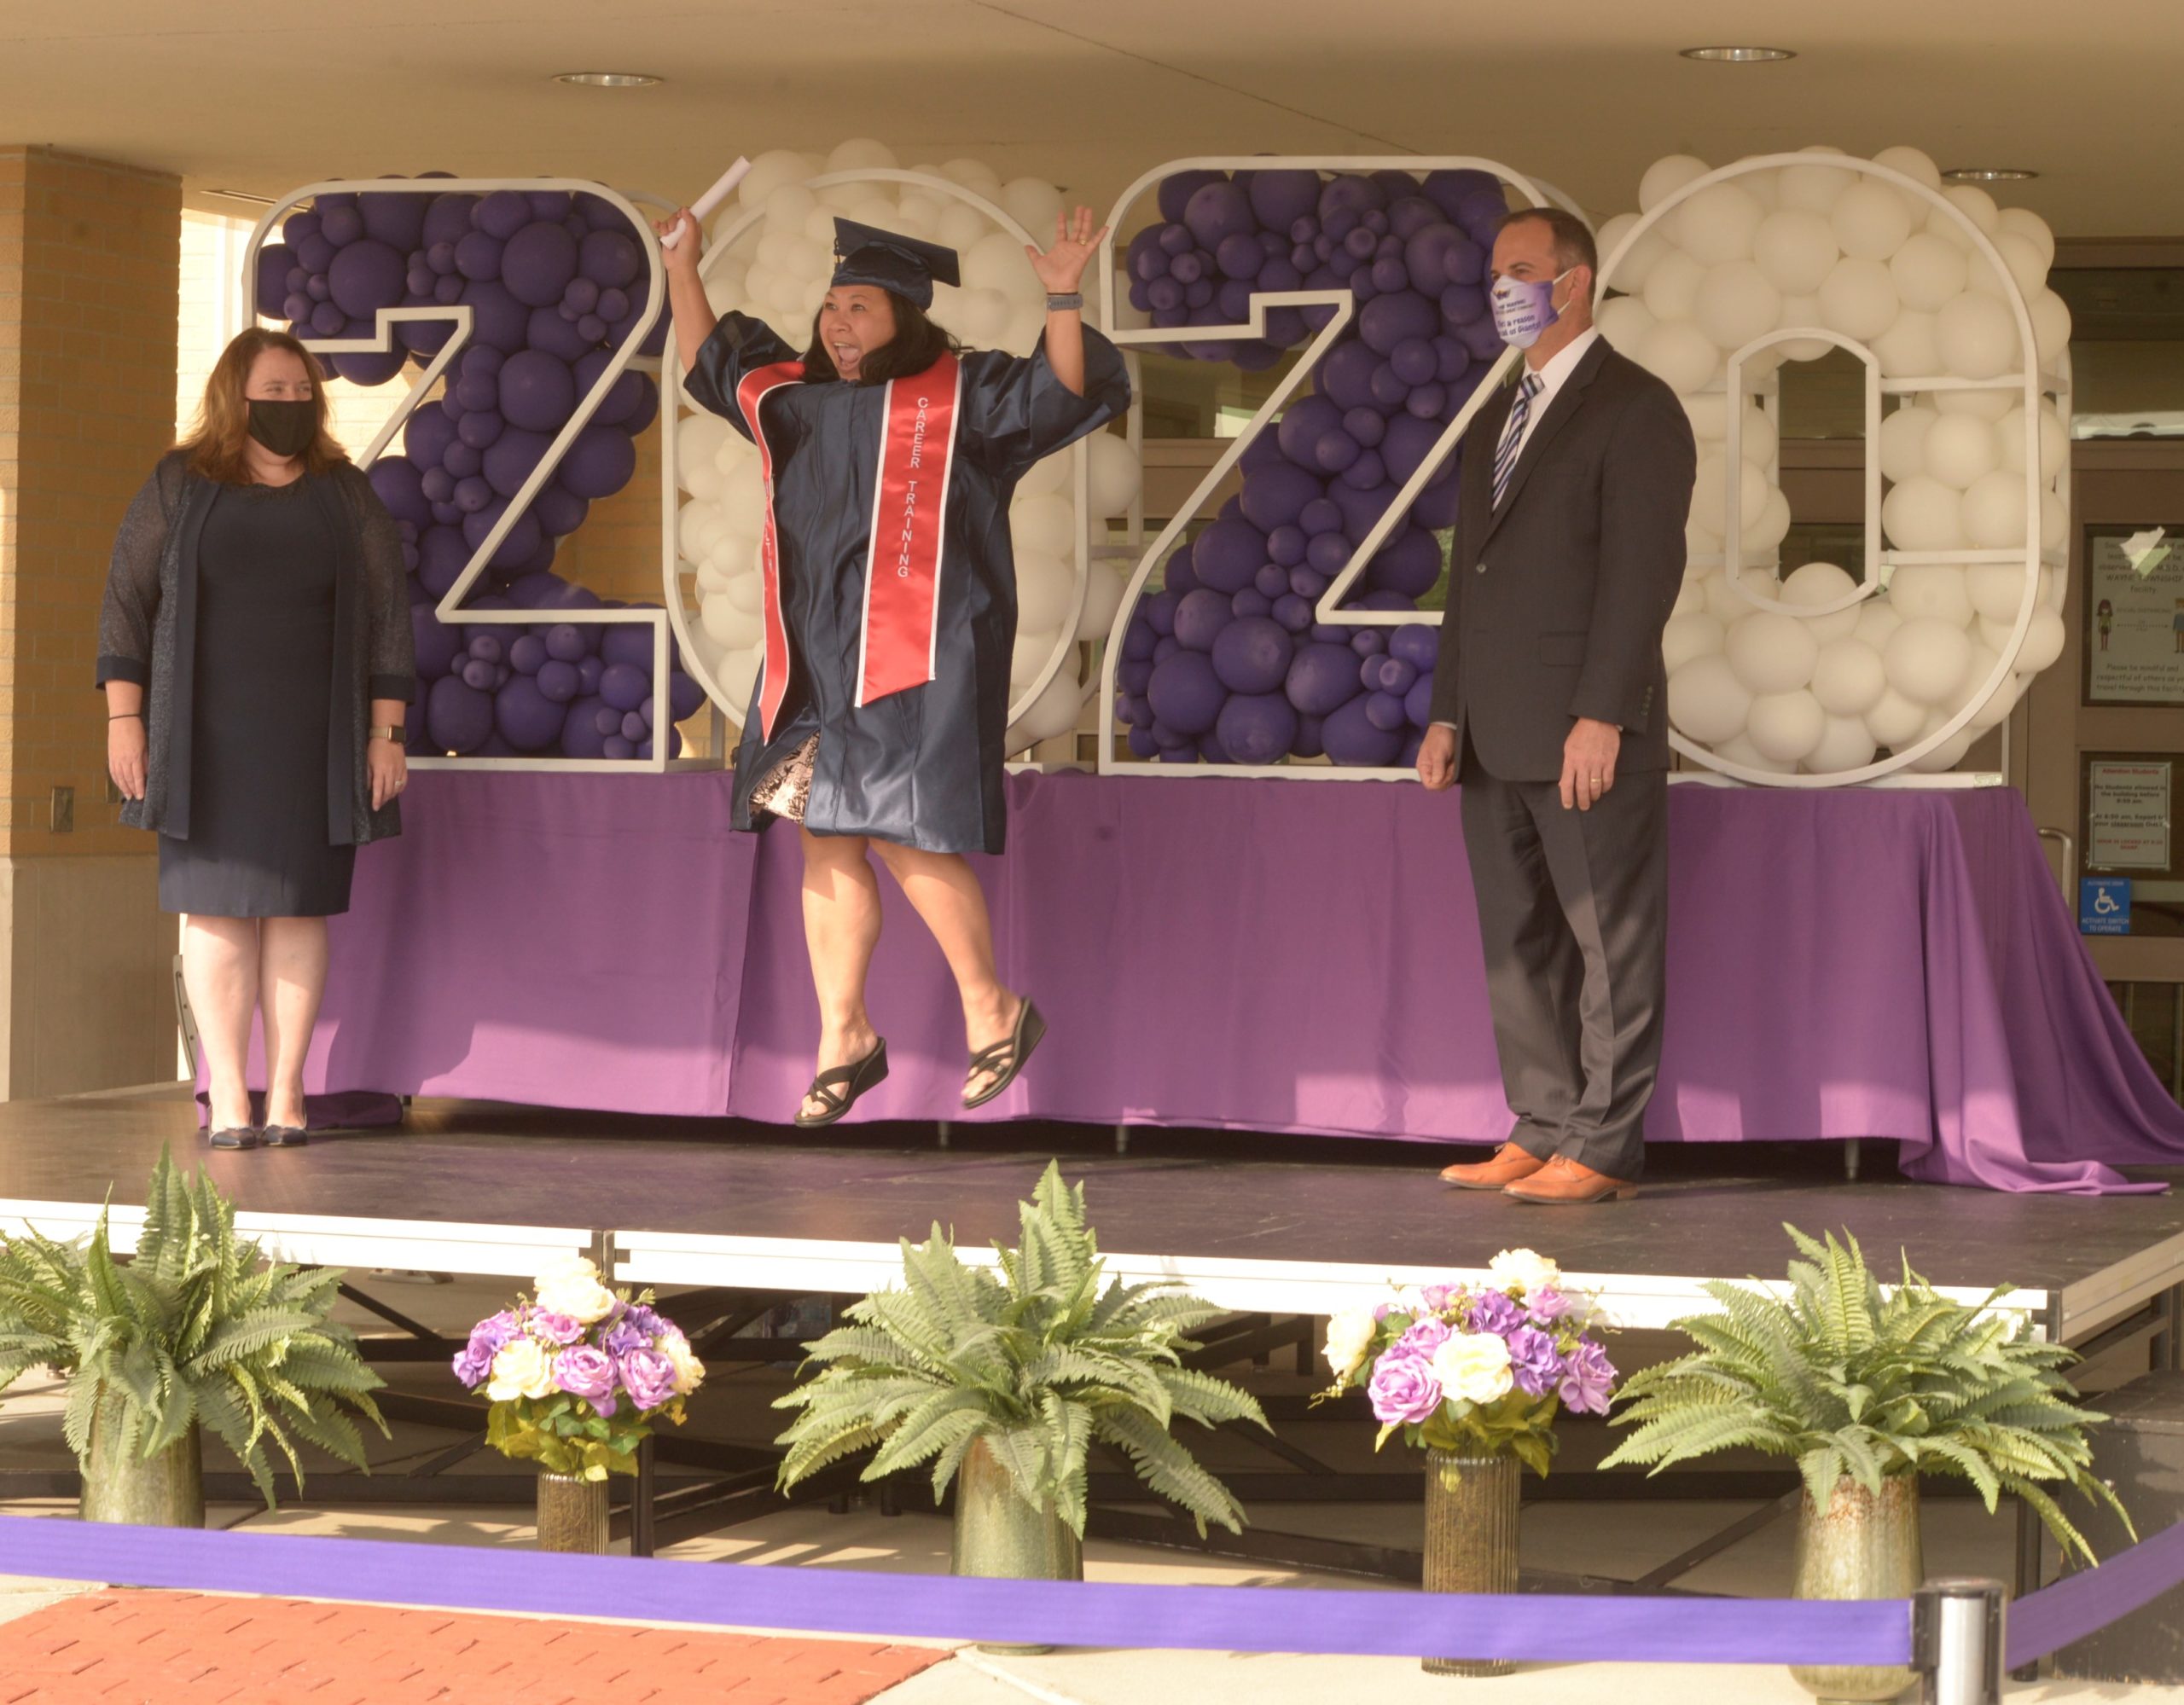 Wayne Township Adult Education Holds Drive-Through Ceremony for 2020 Graduates